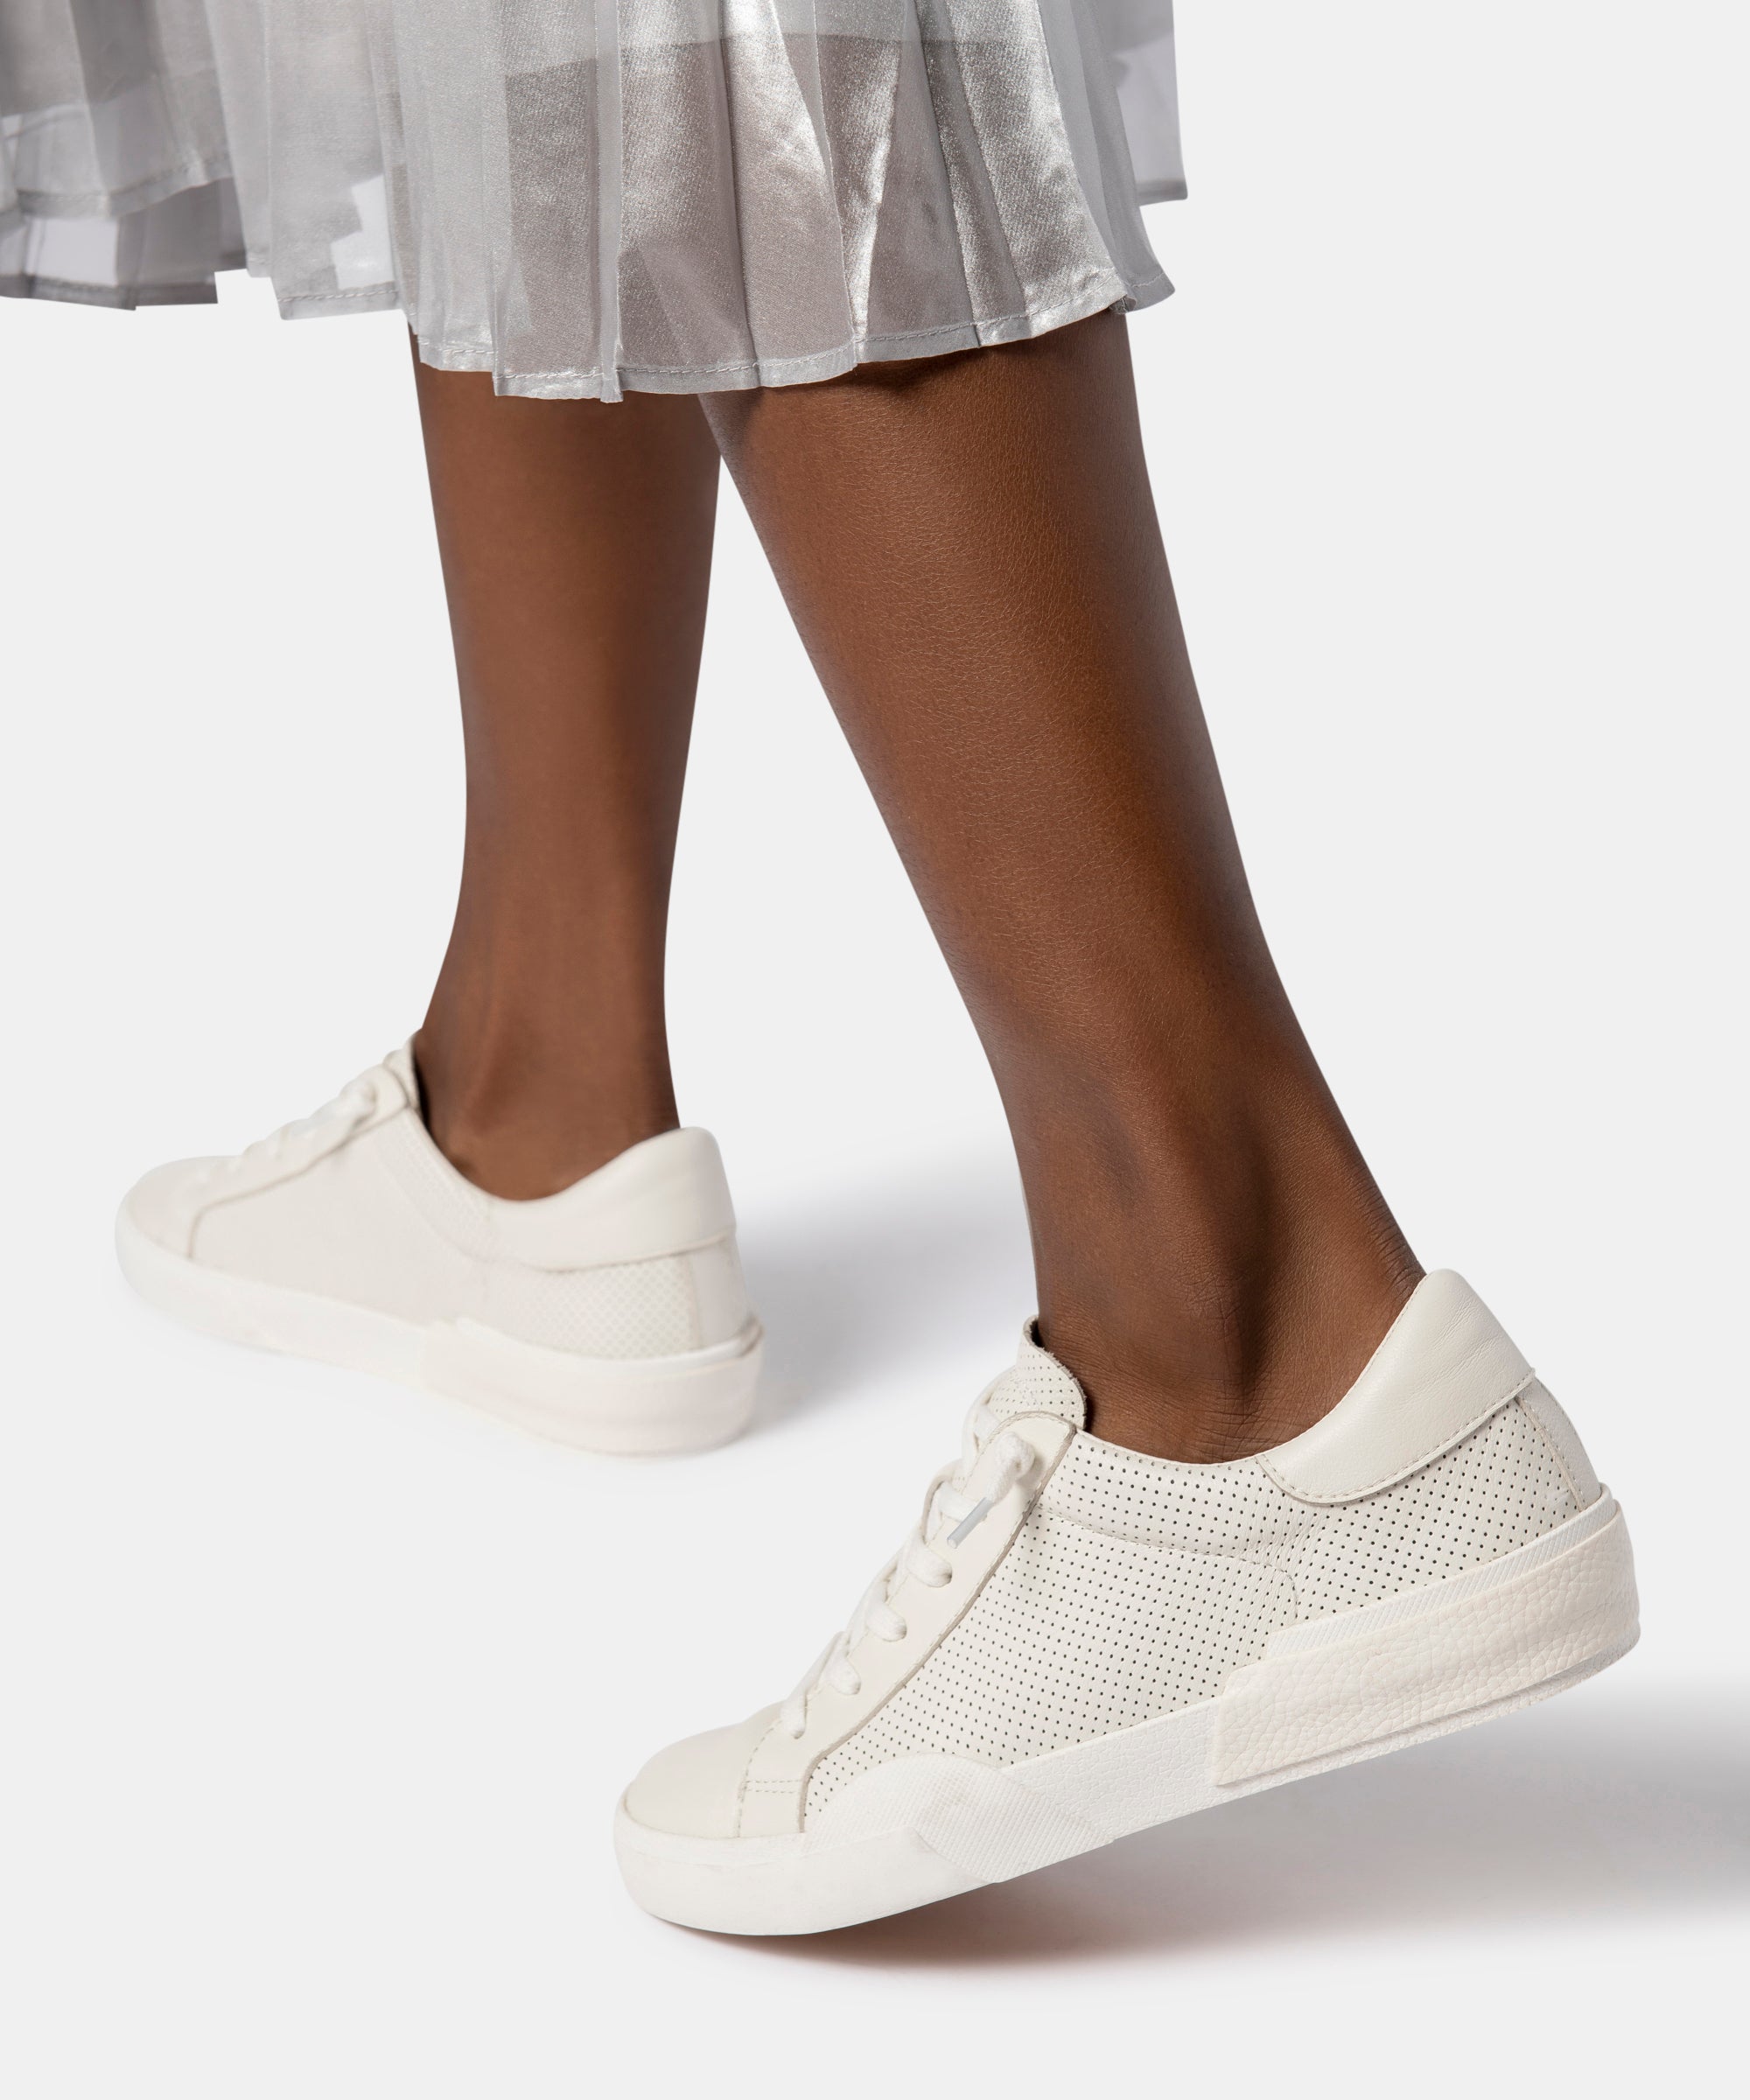 ZINA SNEAKERS IN WHITE PERFORATED LEATHER – Dolce Vita